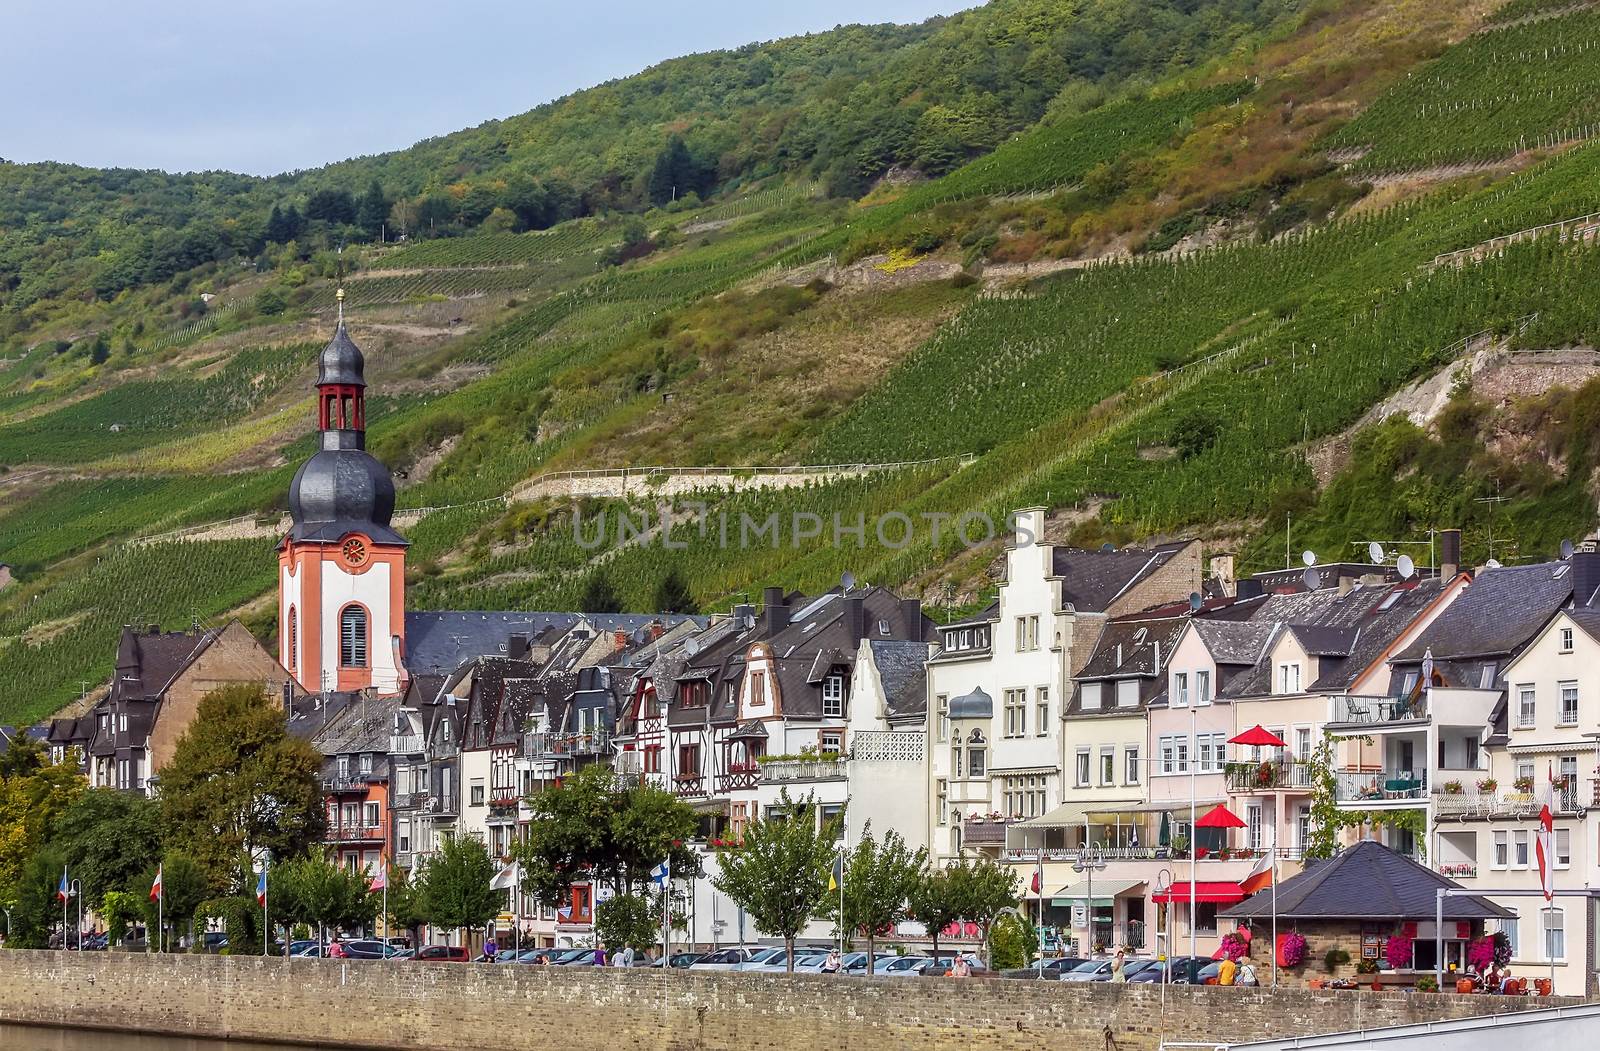 Zell is a city on the banks of the Moselle, Germany